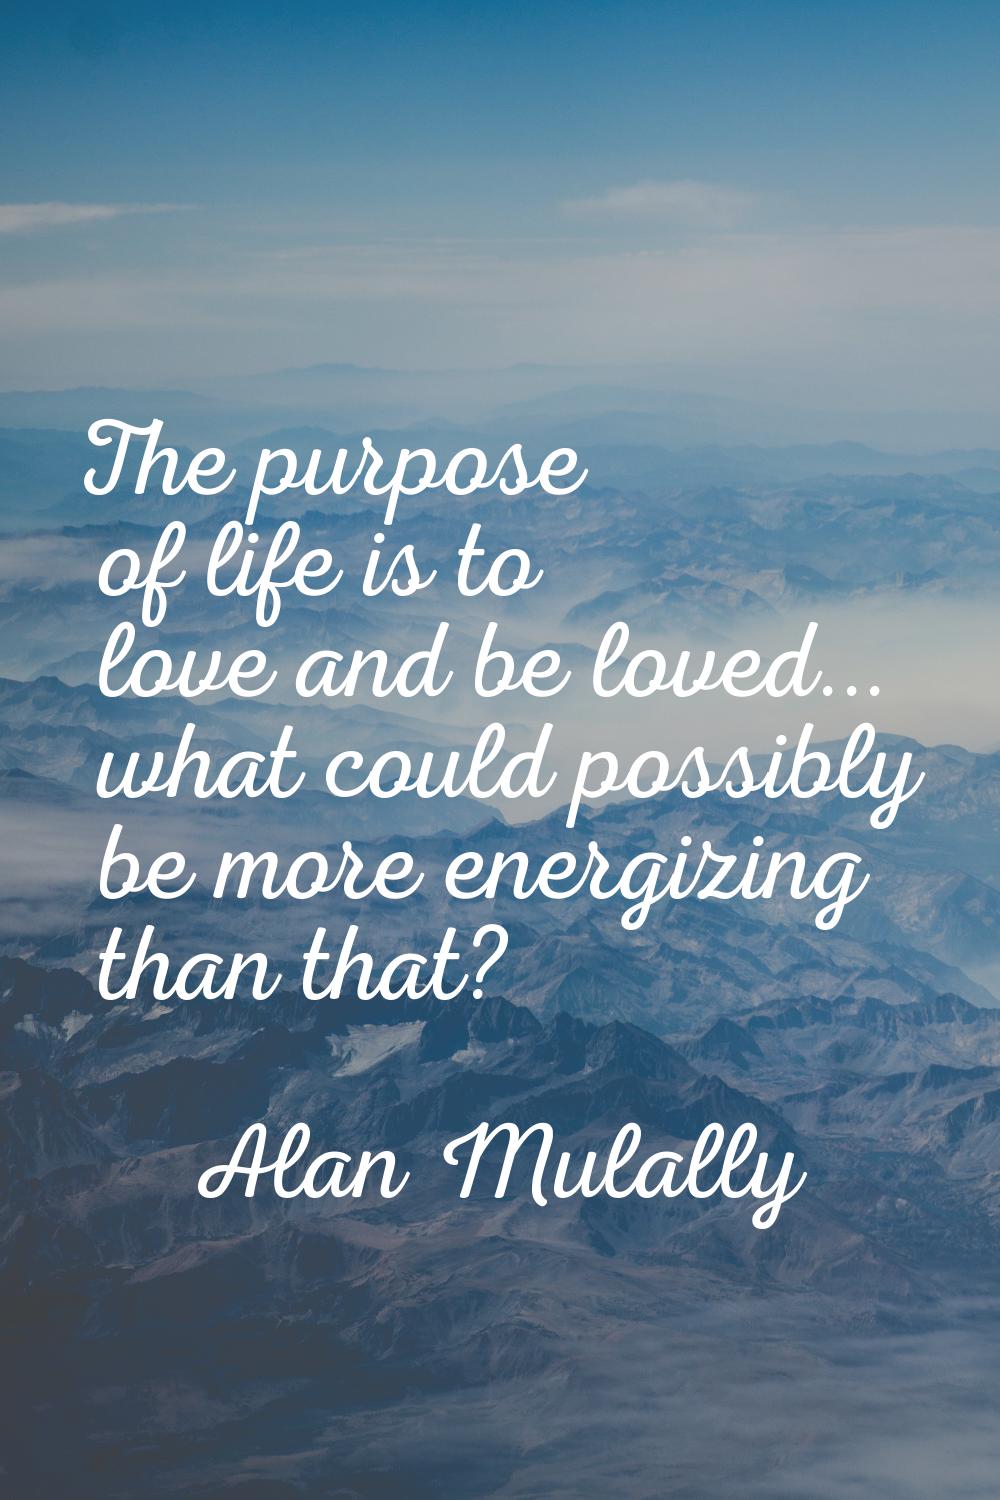 The purpose of life is to love and be loved... what could possibly be more energizing than that?